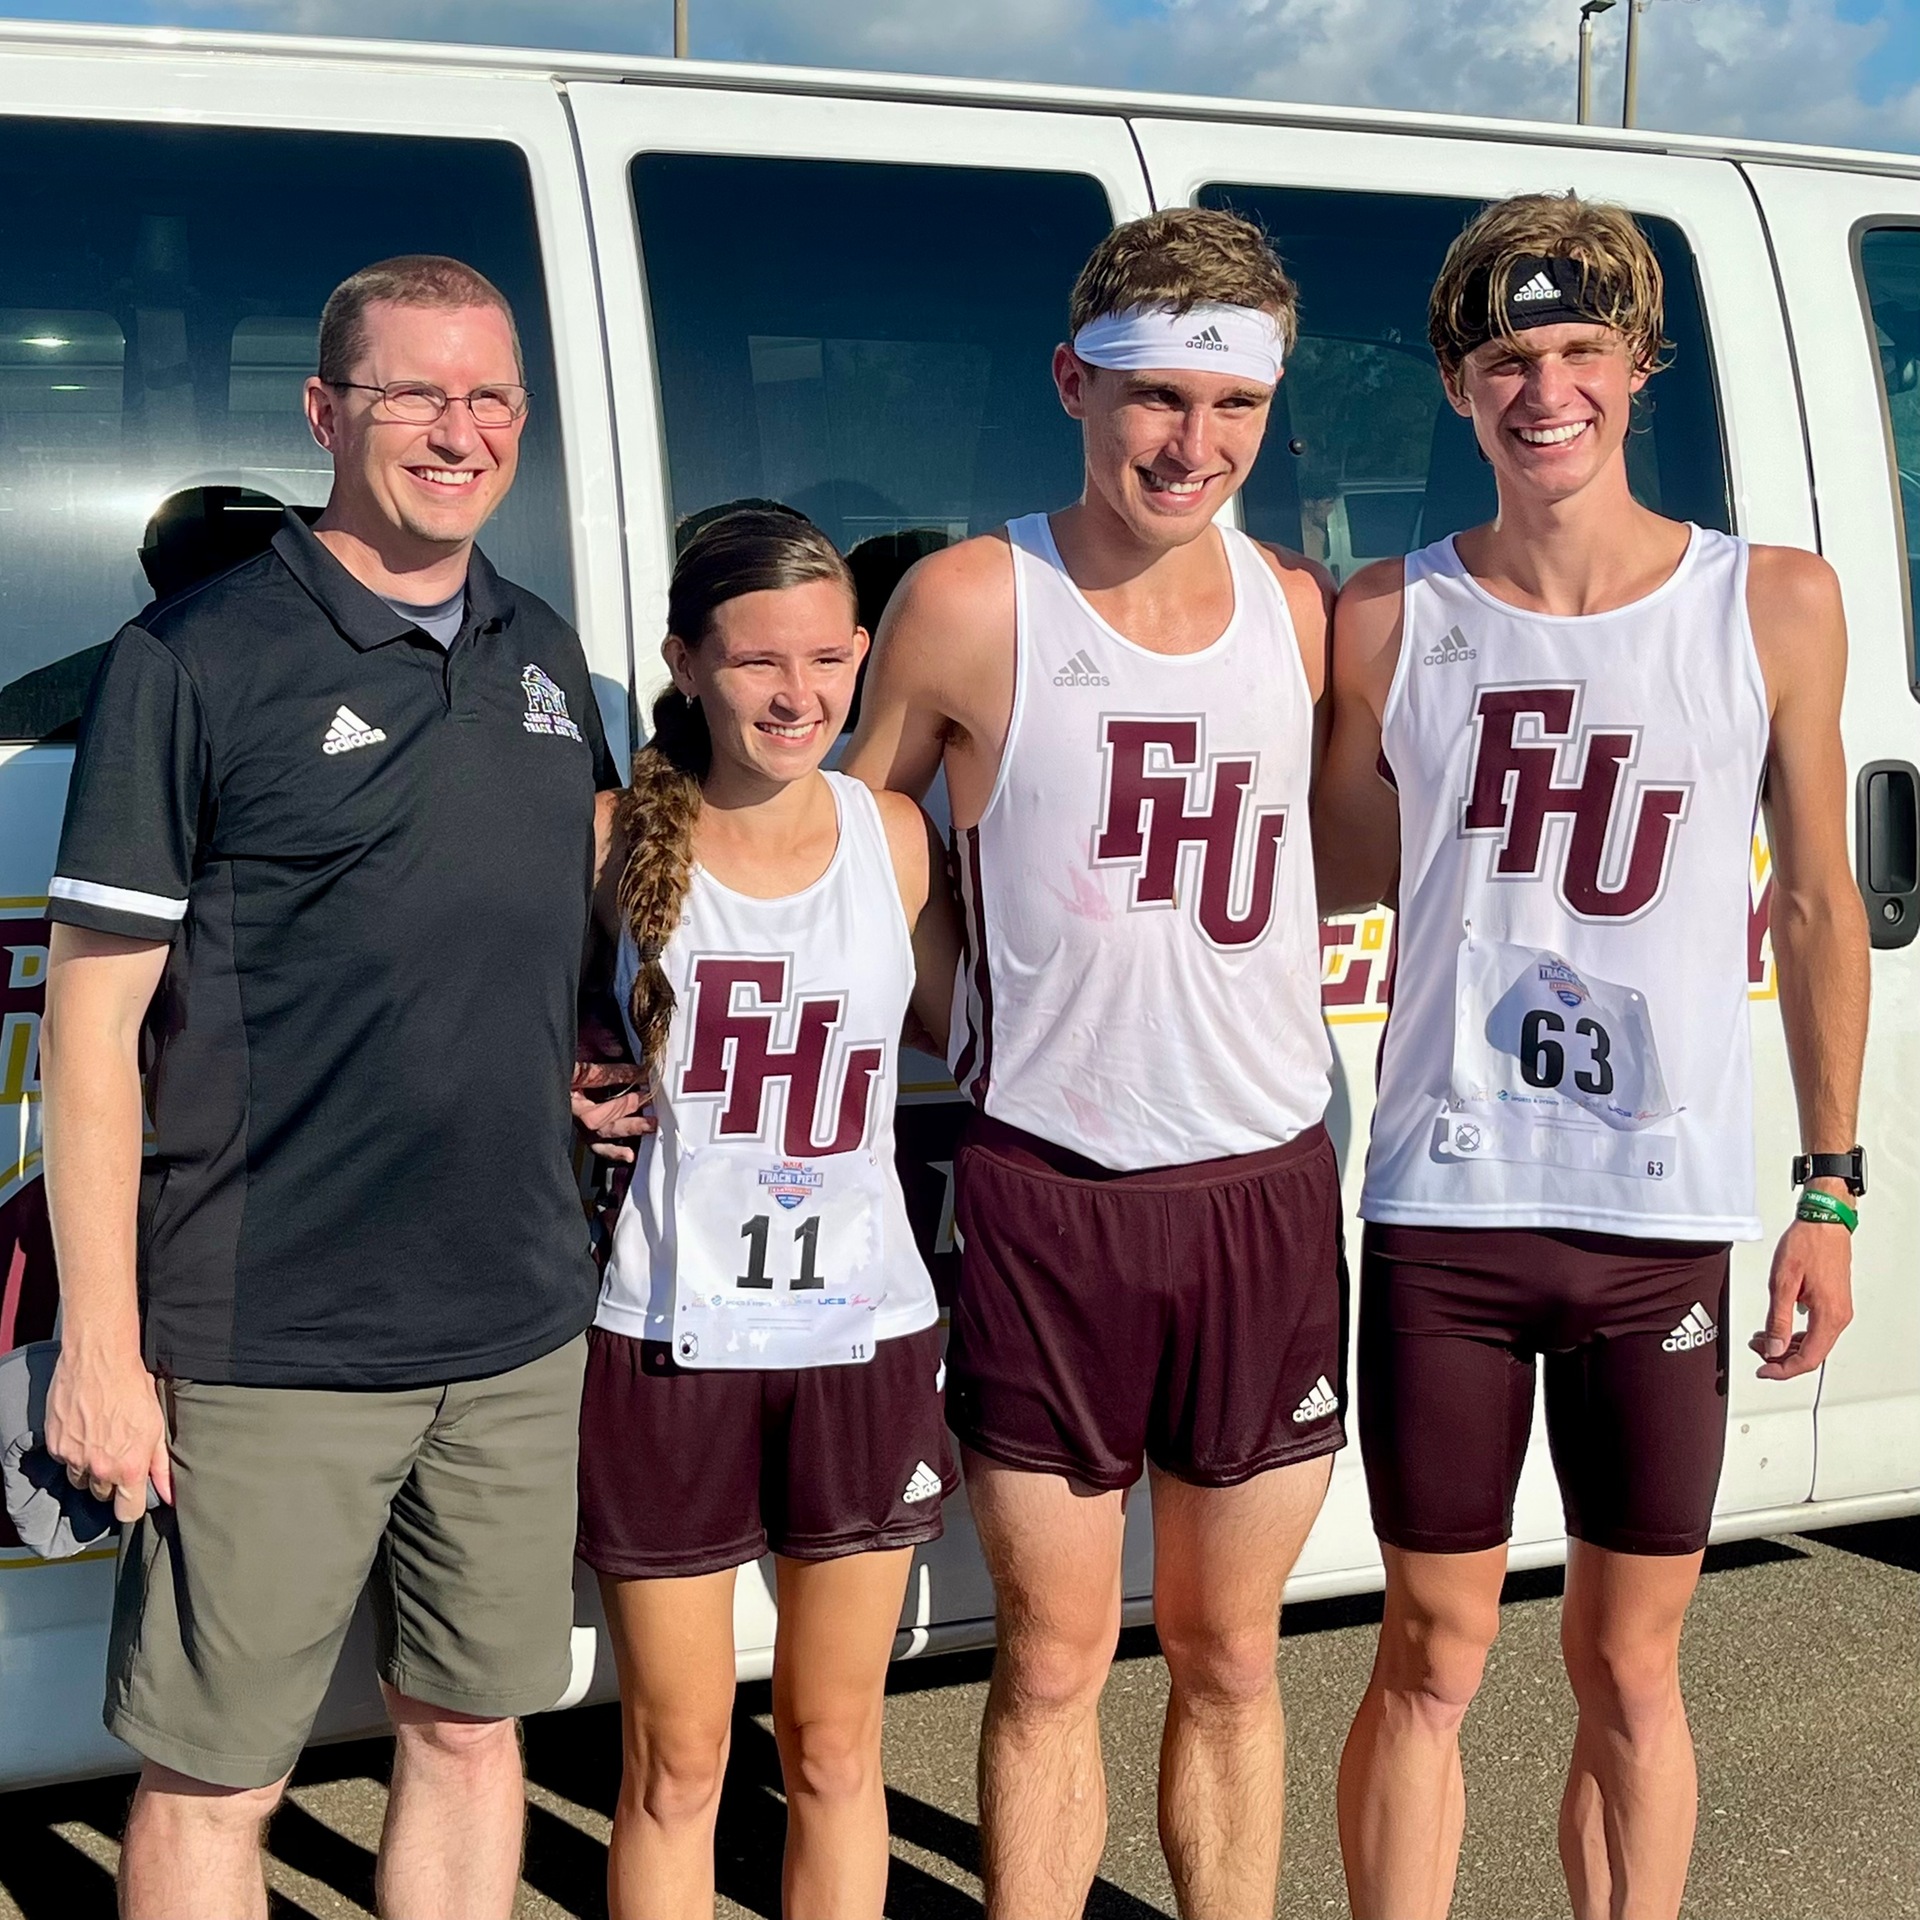 FHU T&amp;F sees record year come to conclusion in Alabama